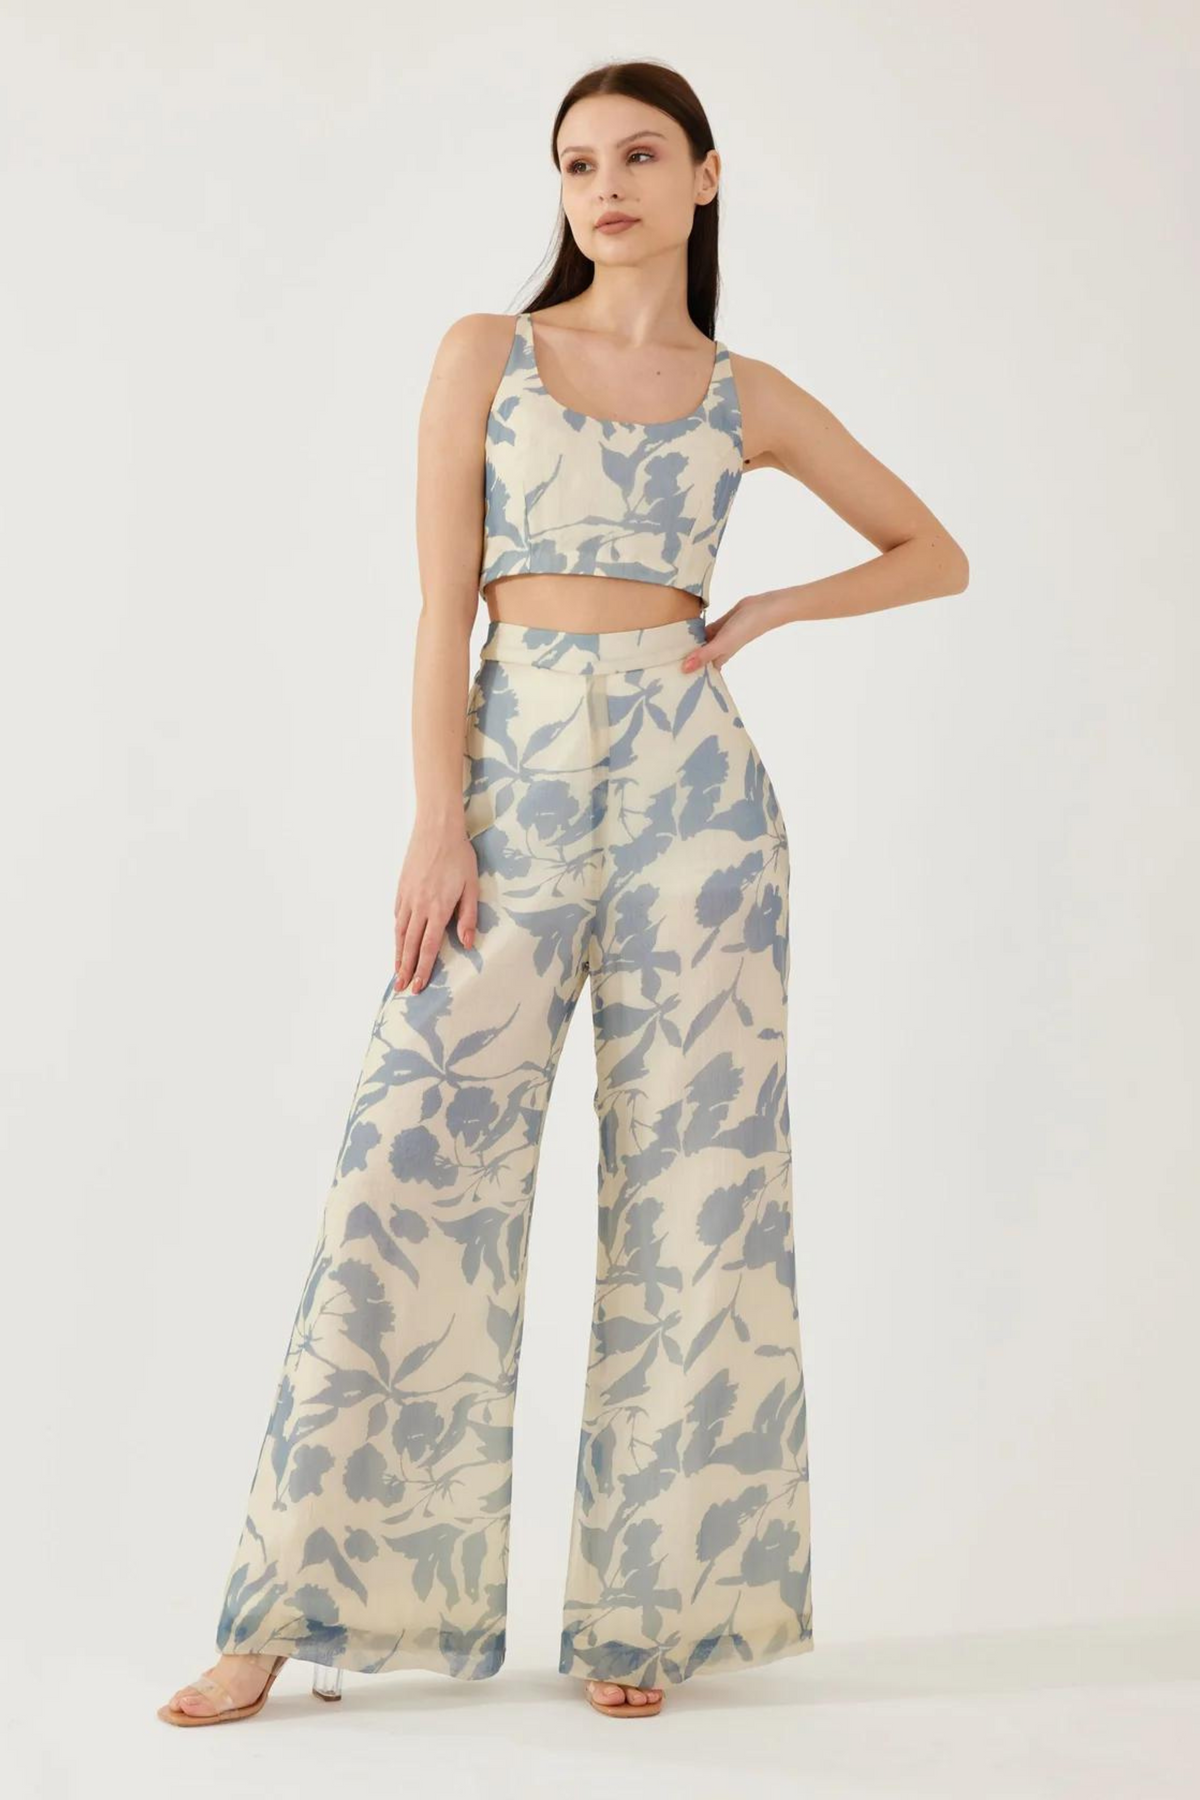 Cream and Blue Floral Pants